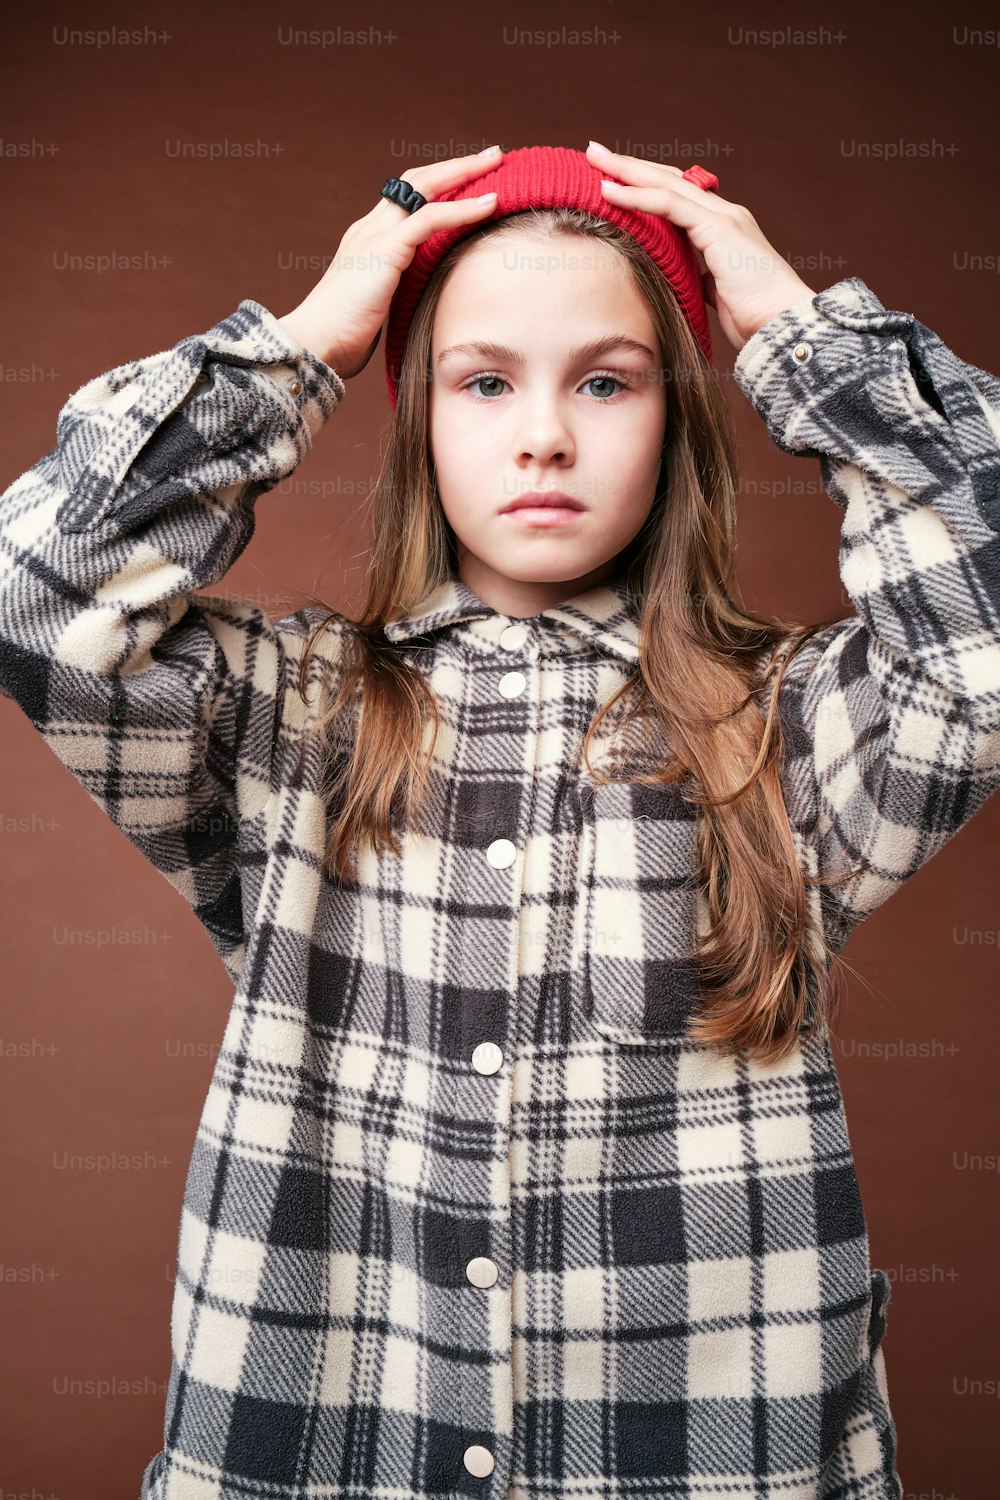 a young girl wearing a plaid jacket and a red beanie